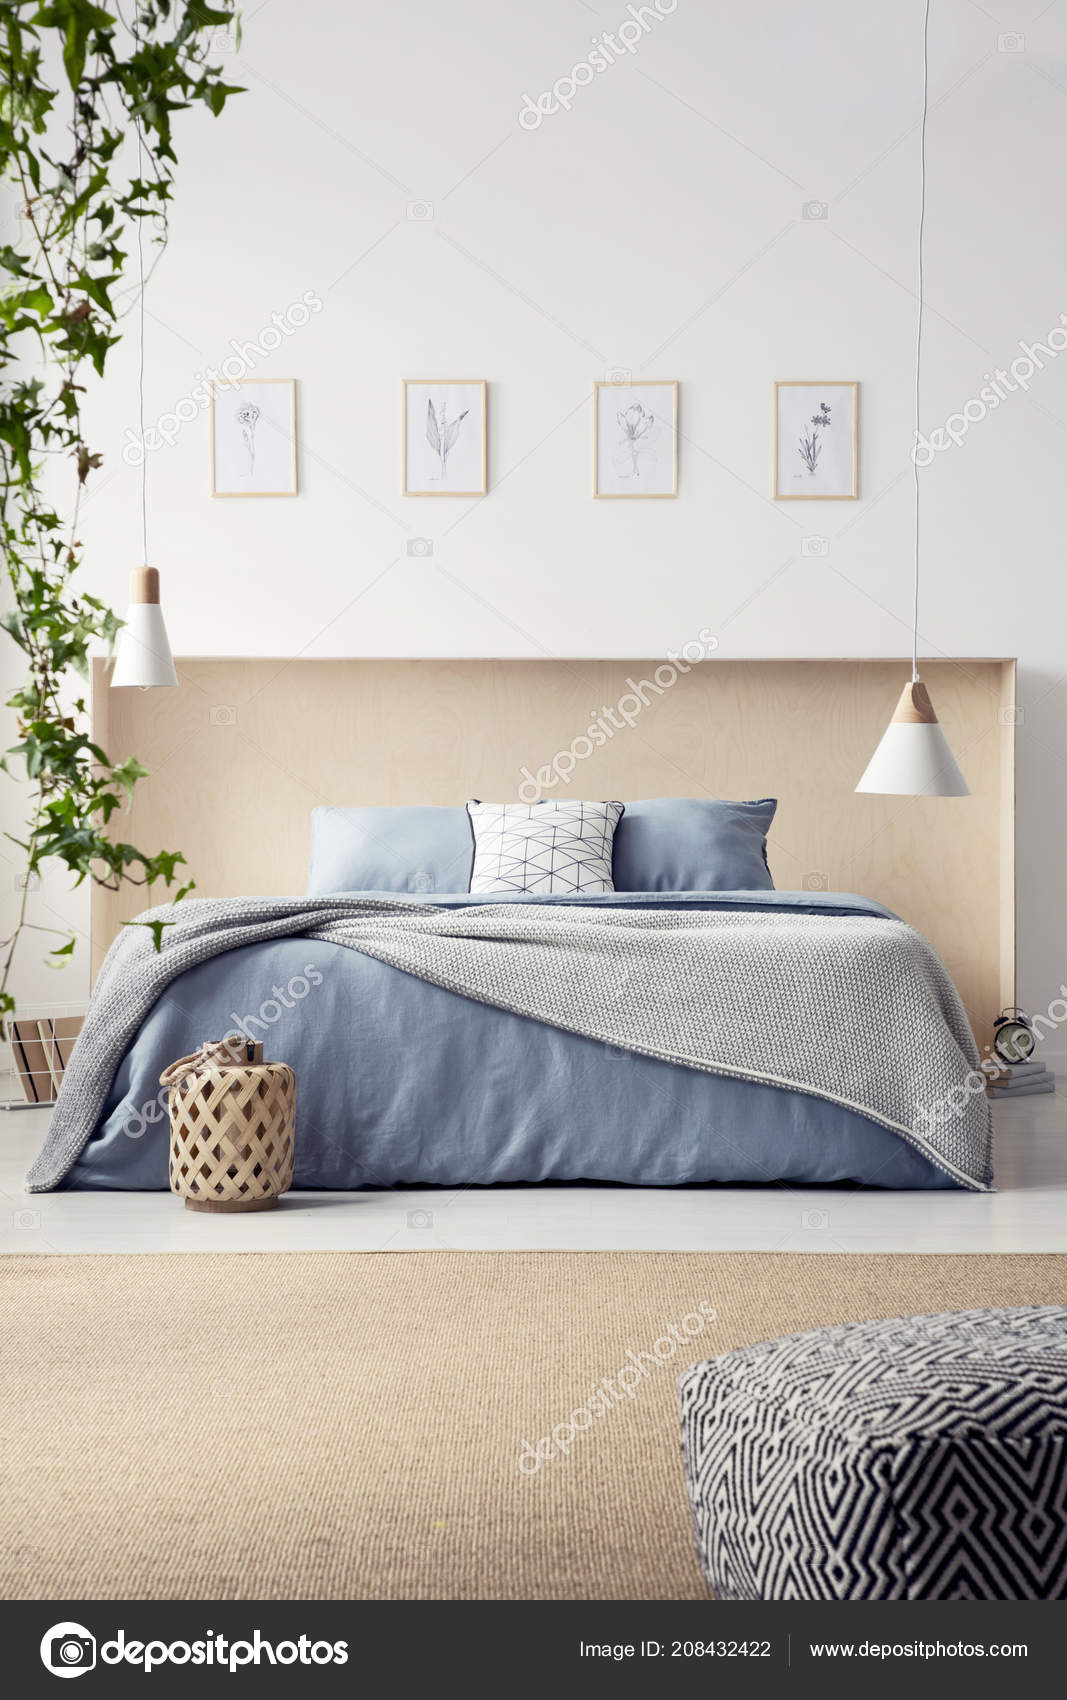 Real Photo King Size Bed Pastel Blue Bedclothes Box Headboard Royalty Free Photo Stock Image By C Photographee Eu 208432422